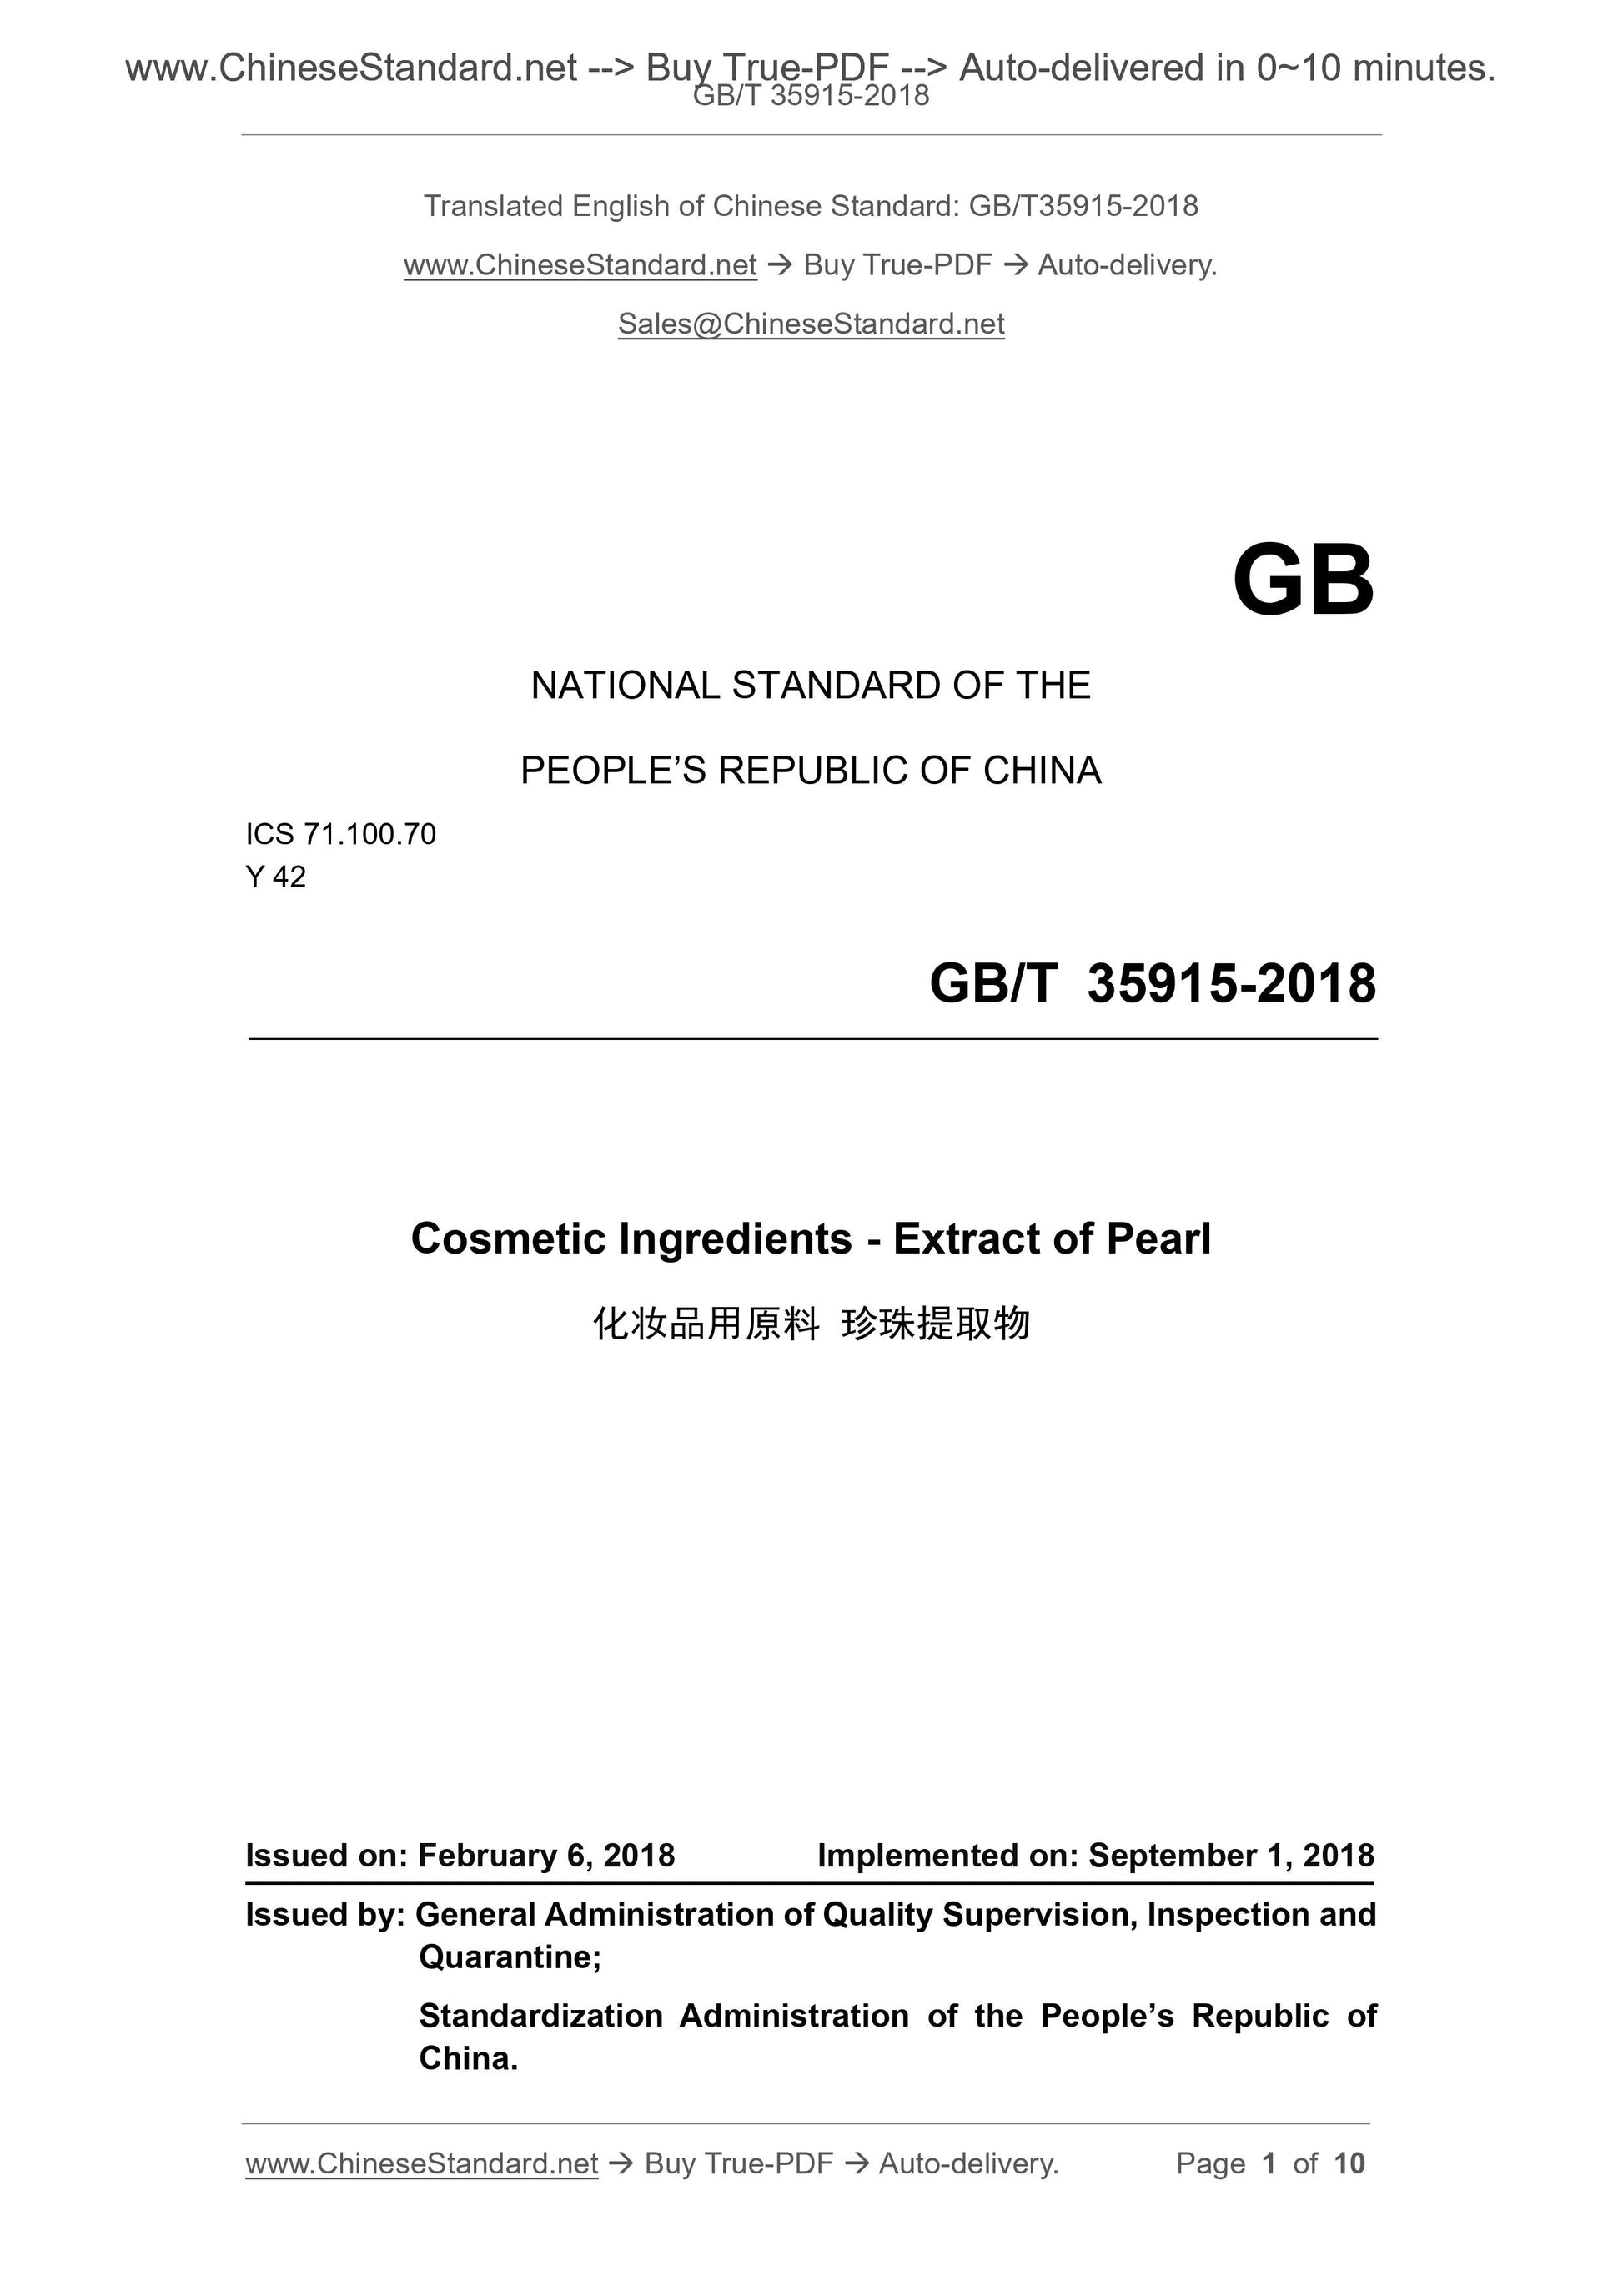 GB/T 35915-2018 Page 1